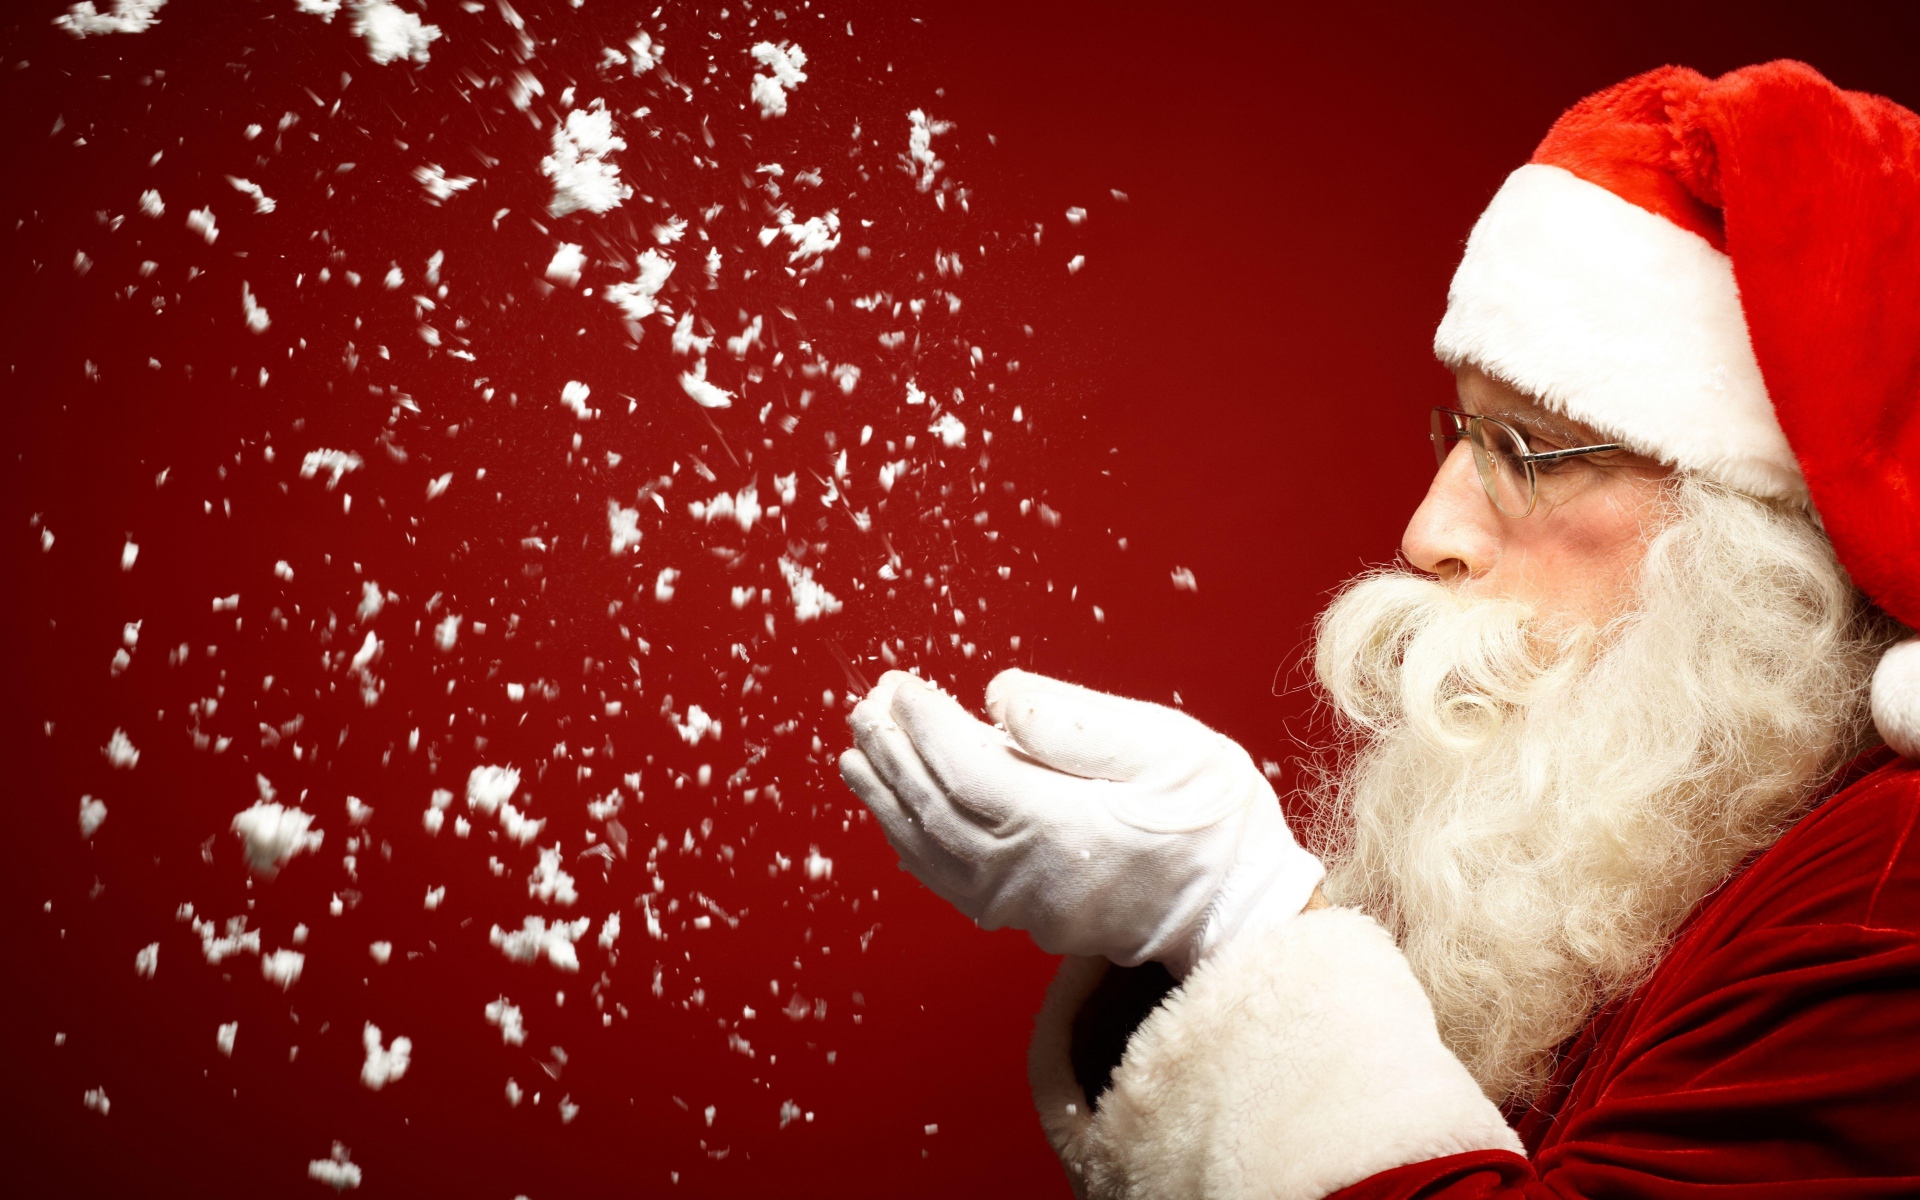 Gallery For Gt Christmas Santa Claus Wallpaper